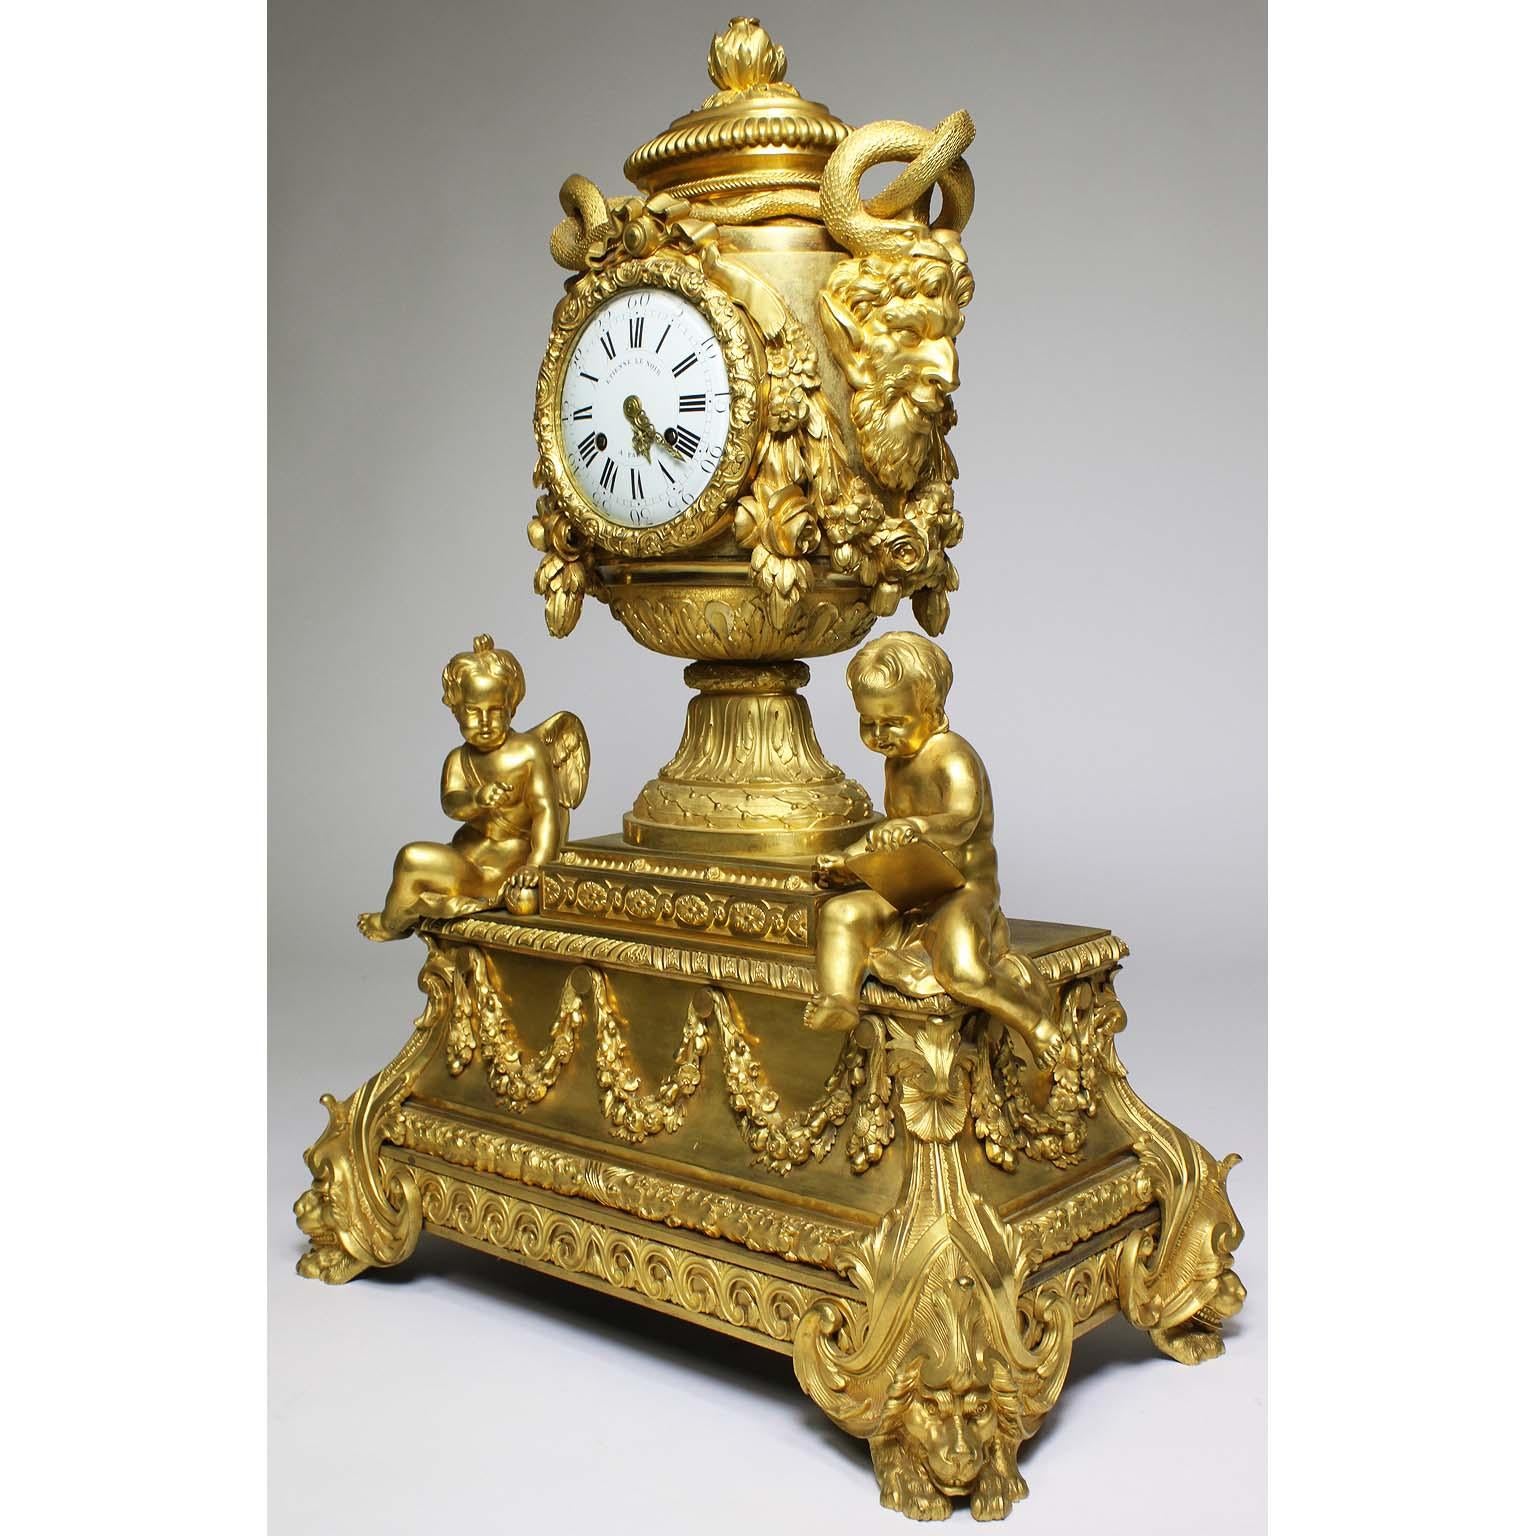 A very fine and Palatial French Louis XVI style figural gilt bronze mantel clock. The vase shaped case surmounted with a pomegranate-cast finial and flanked by large satyr mask handles fitted with intertwined gilt-bronze snakes, amongst floral